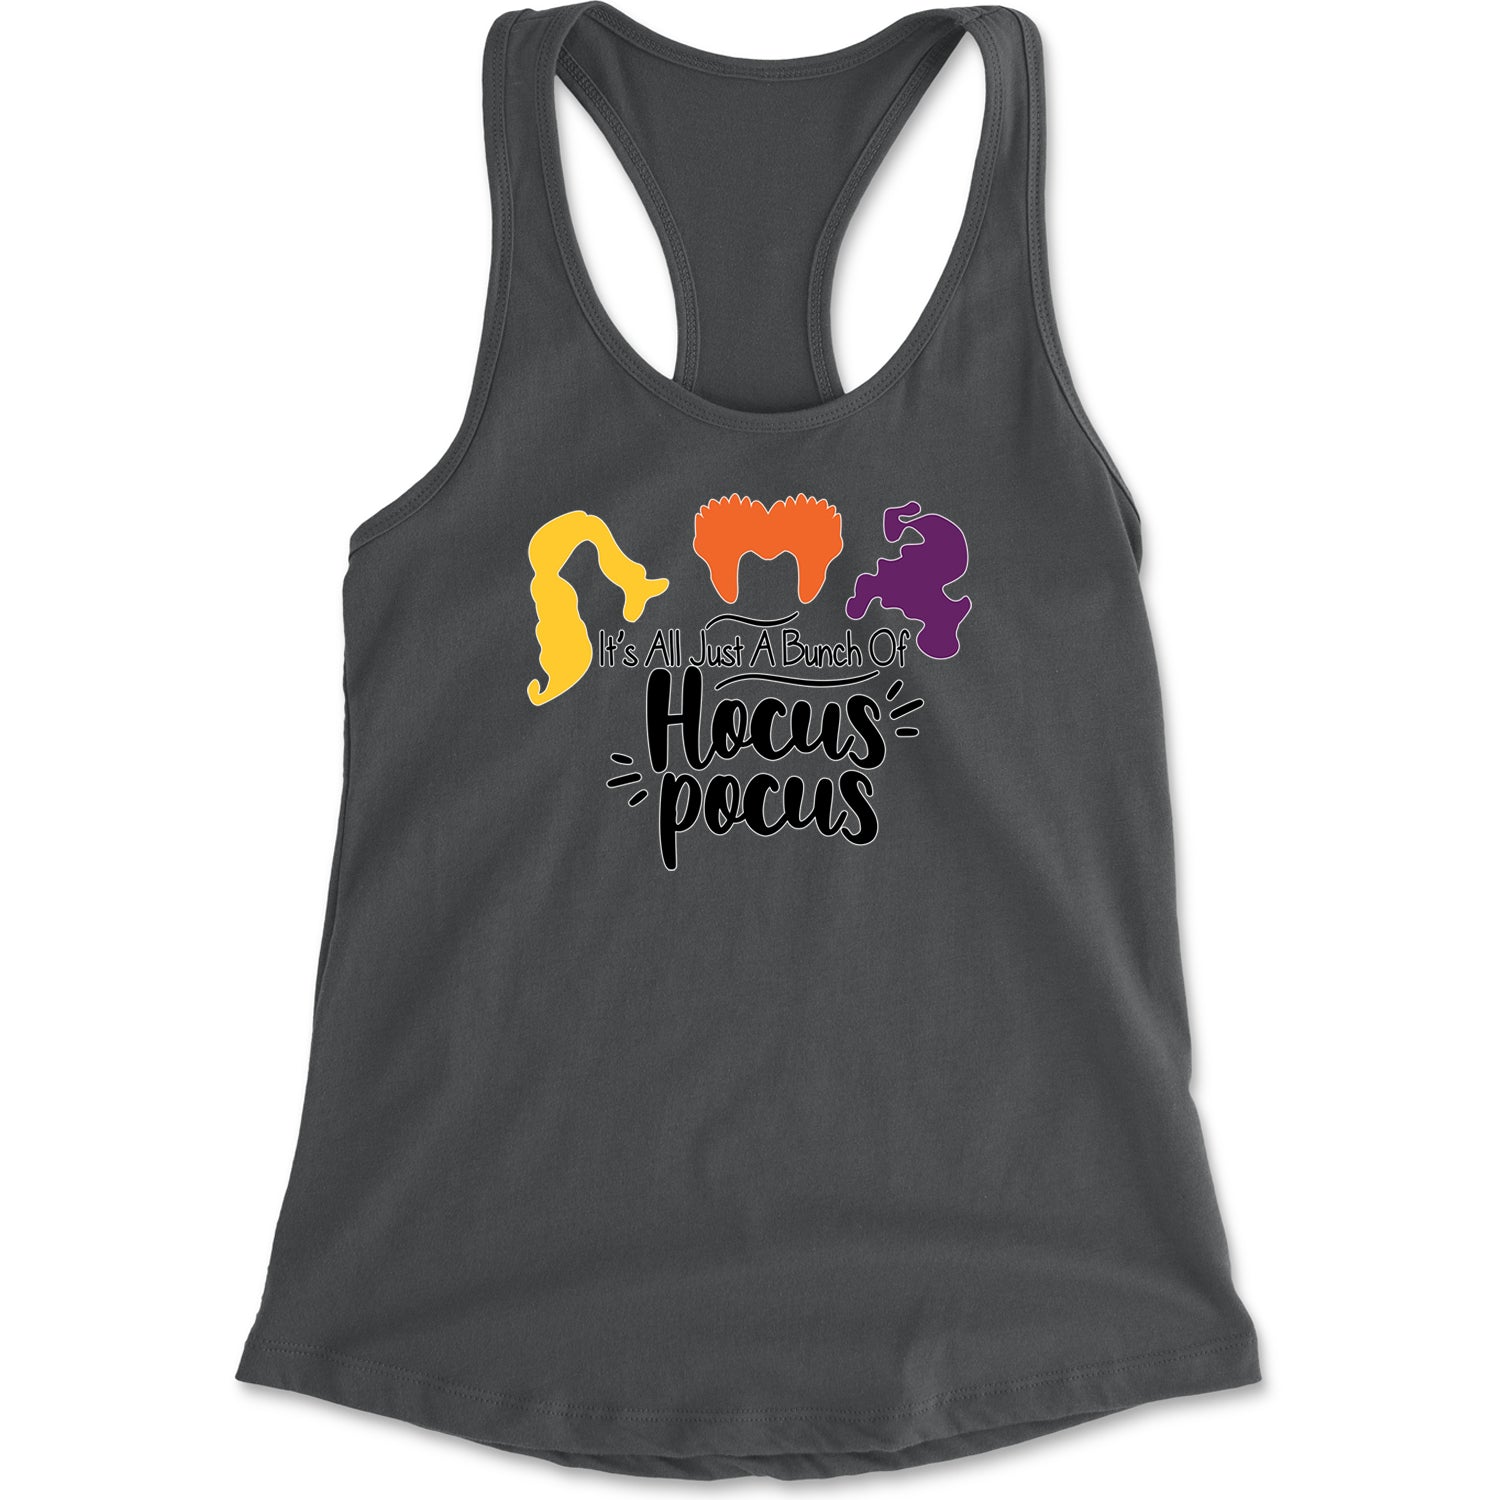 It's Just A Bunch Of Hocus Pocus Racerback Tank Top for Women descendants, enchanted, eve, hallows, hocus, or, pocus, sanderson, sisters, treat, trick, witches by Expression Tees